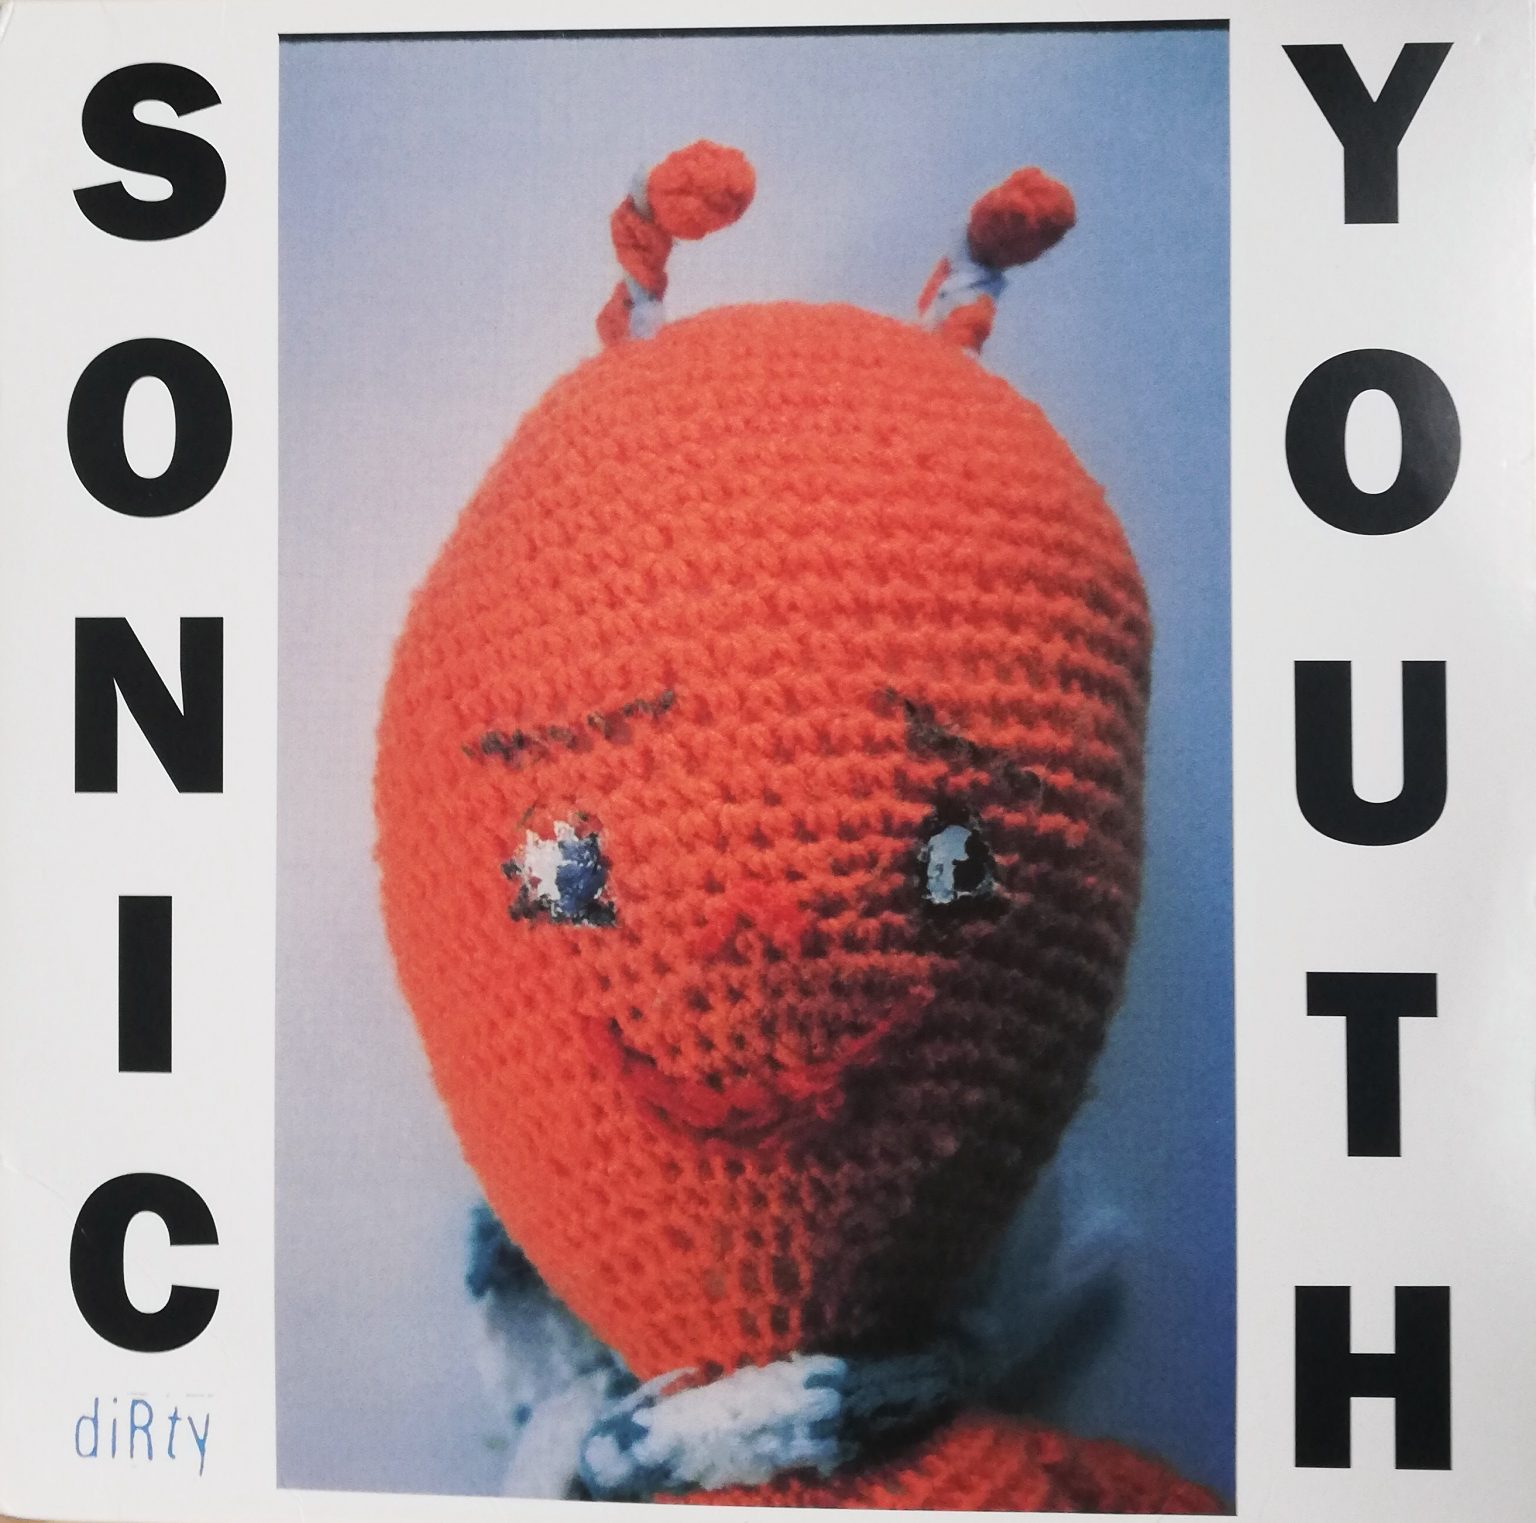 Sonic Youth – Dirt